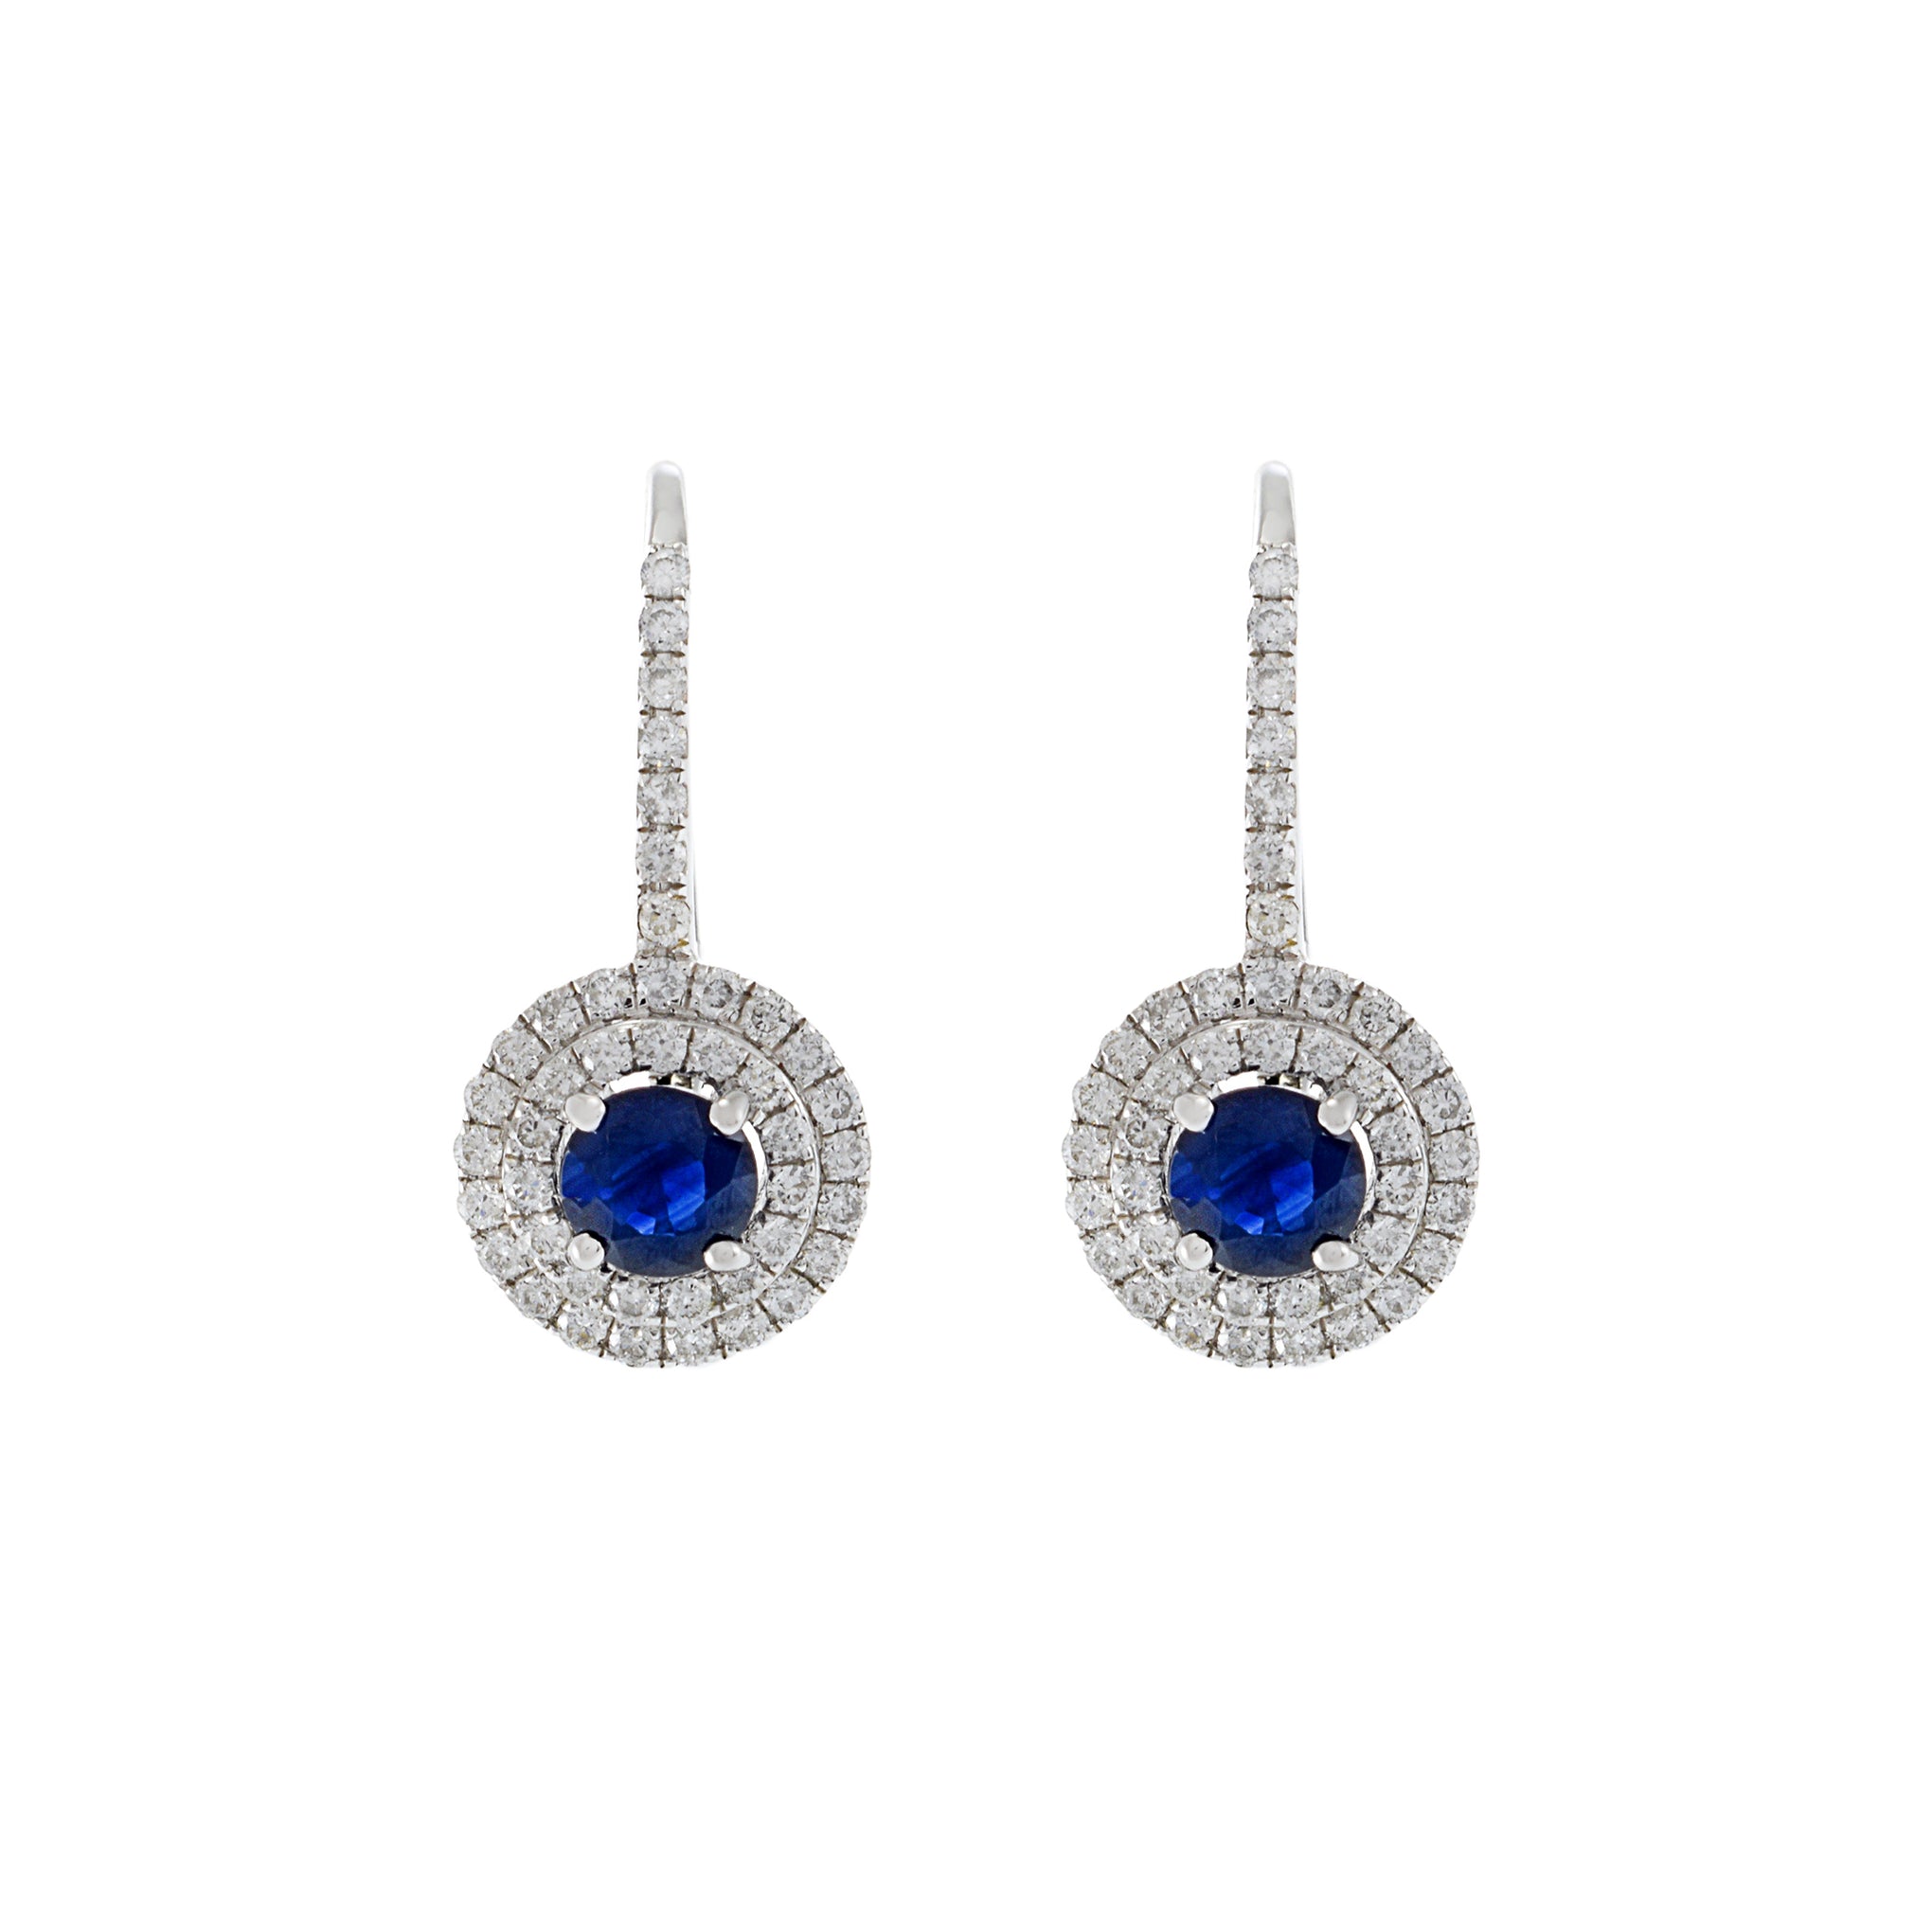 18KT White Gold Diamond And Sapphire Circle Drop Earrings